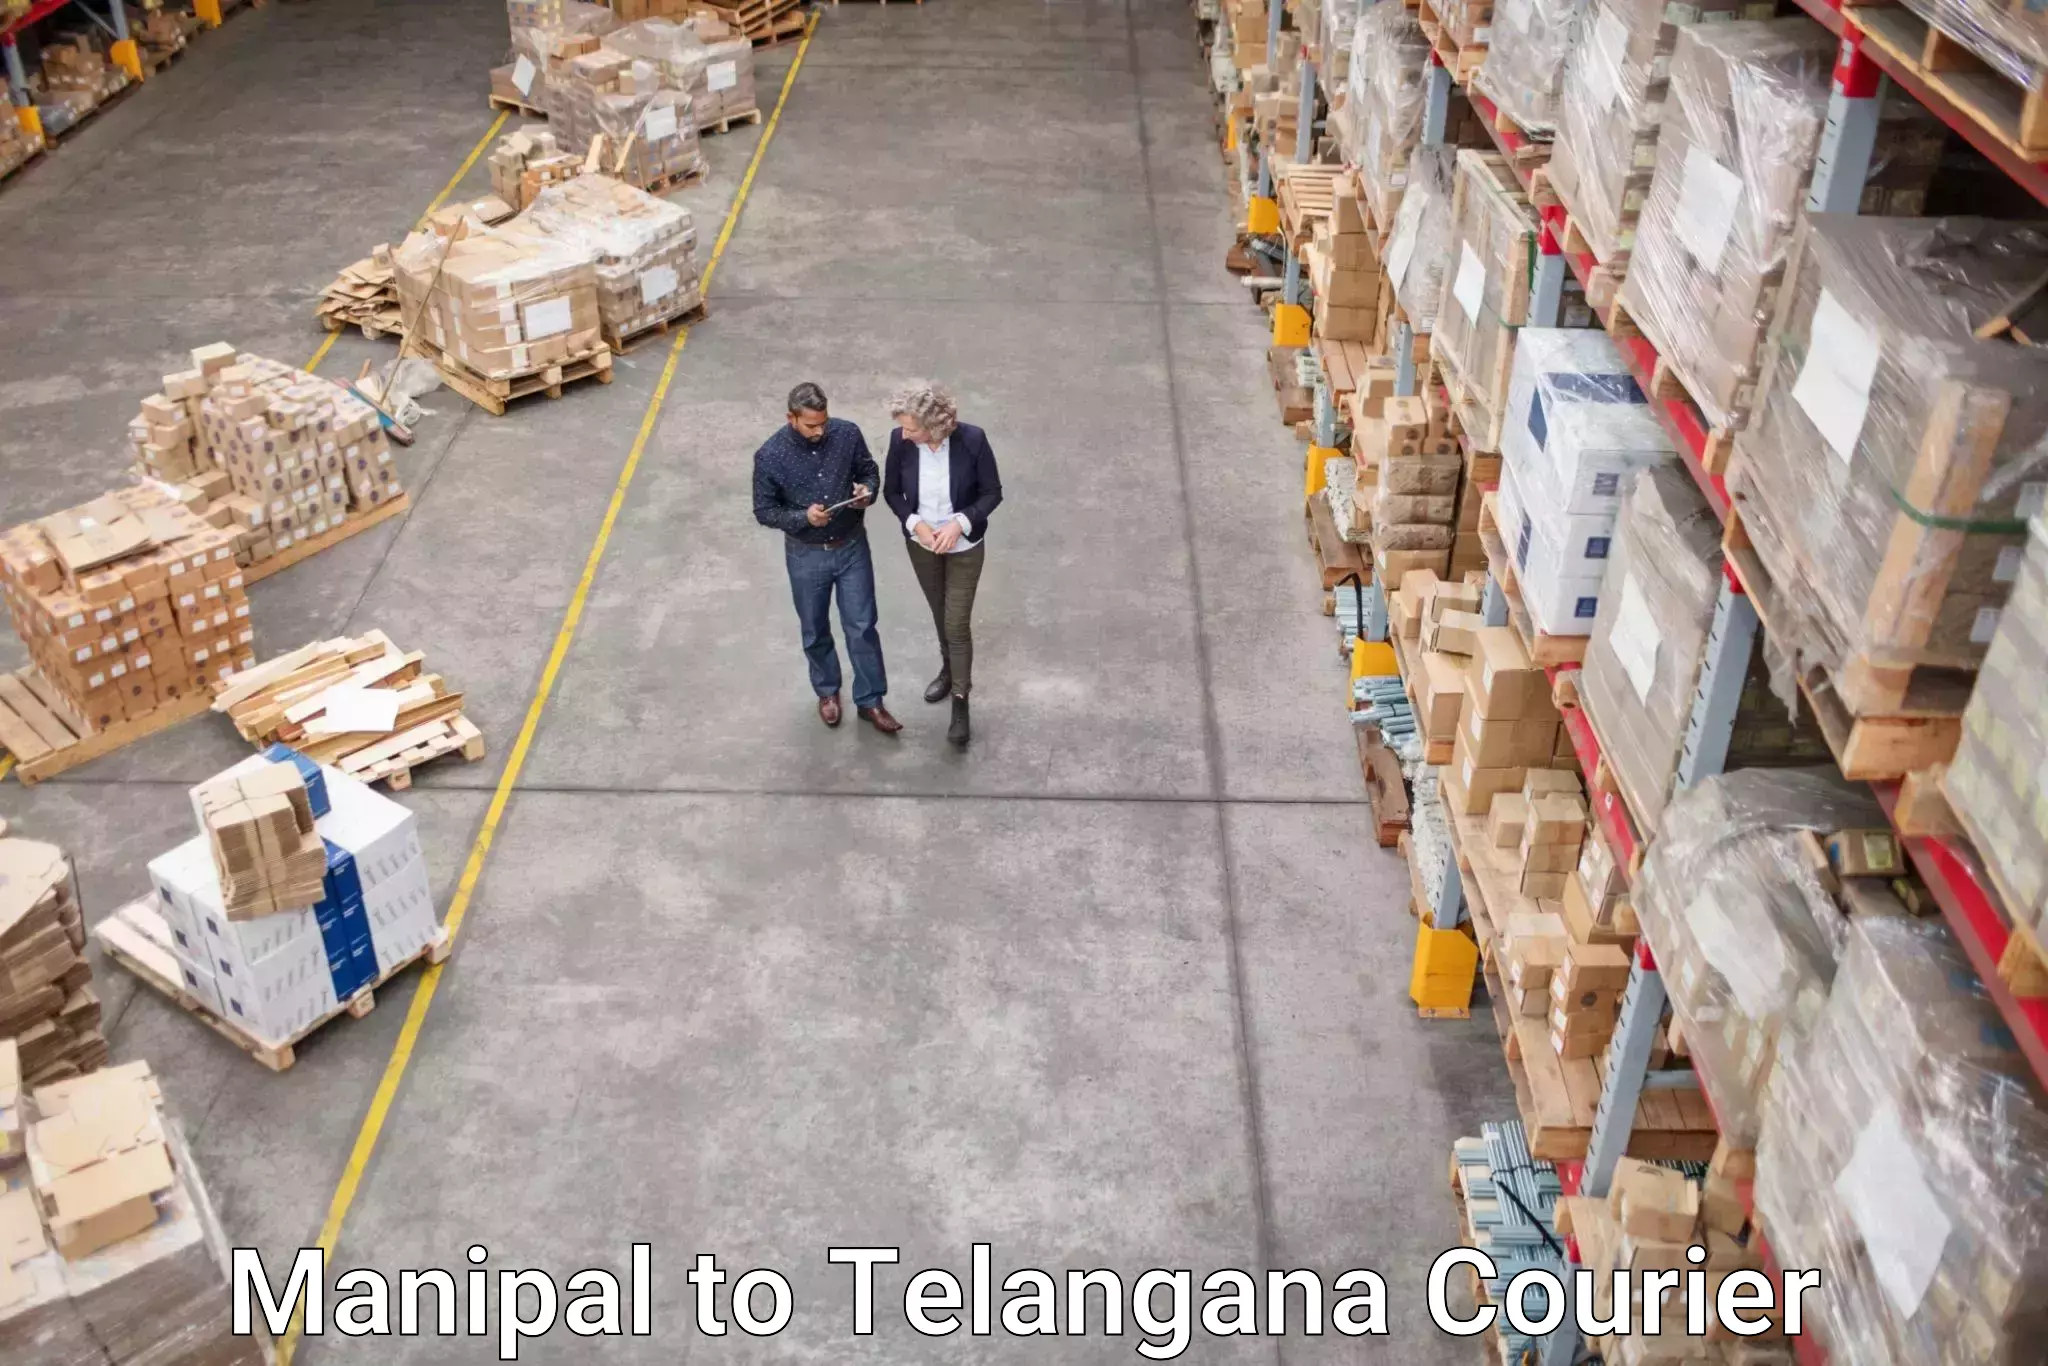 Subscription-based courier Manipal to Alair